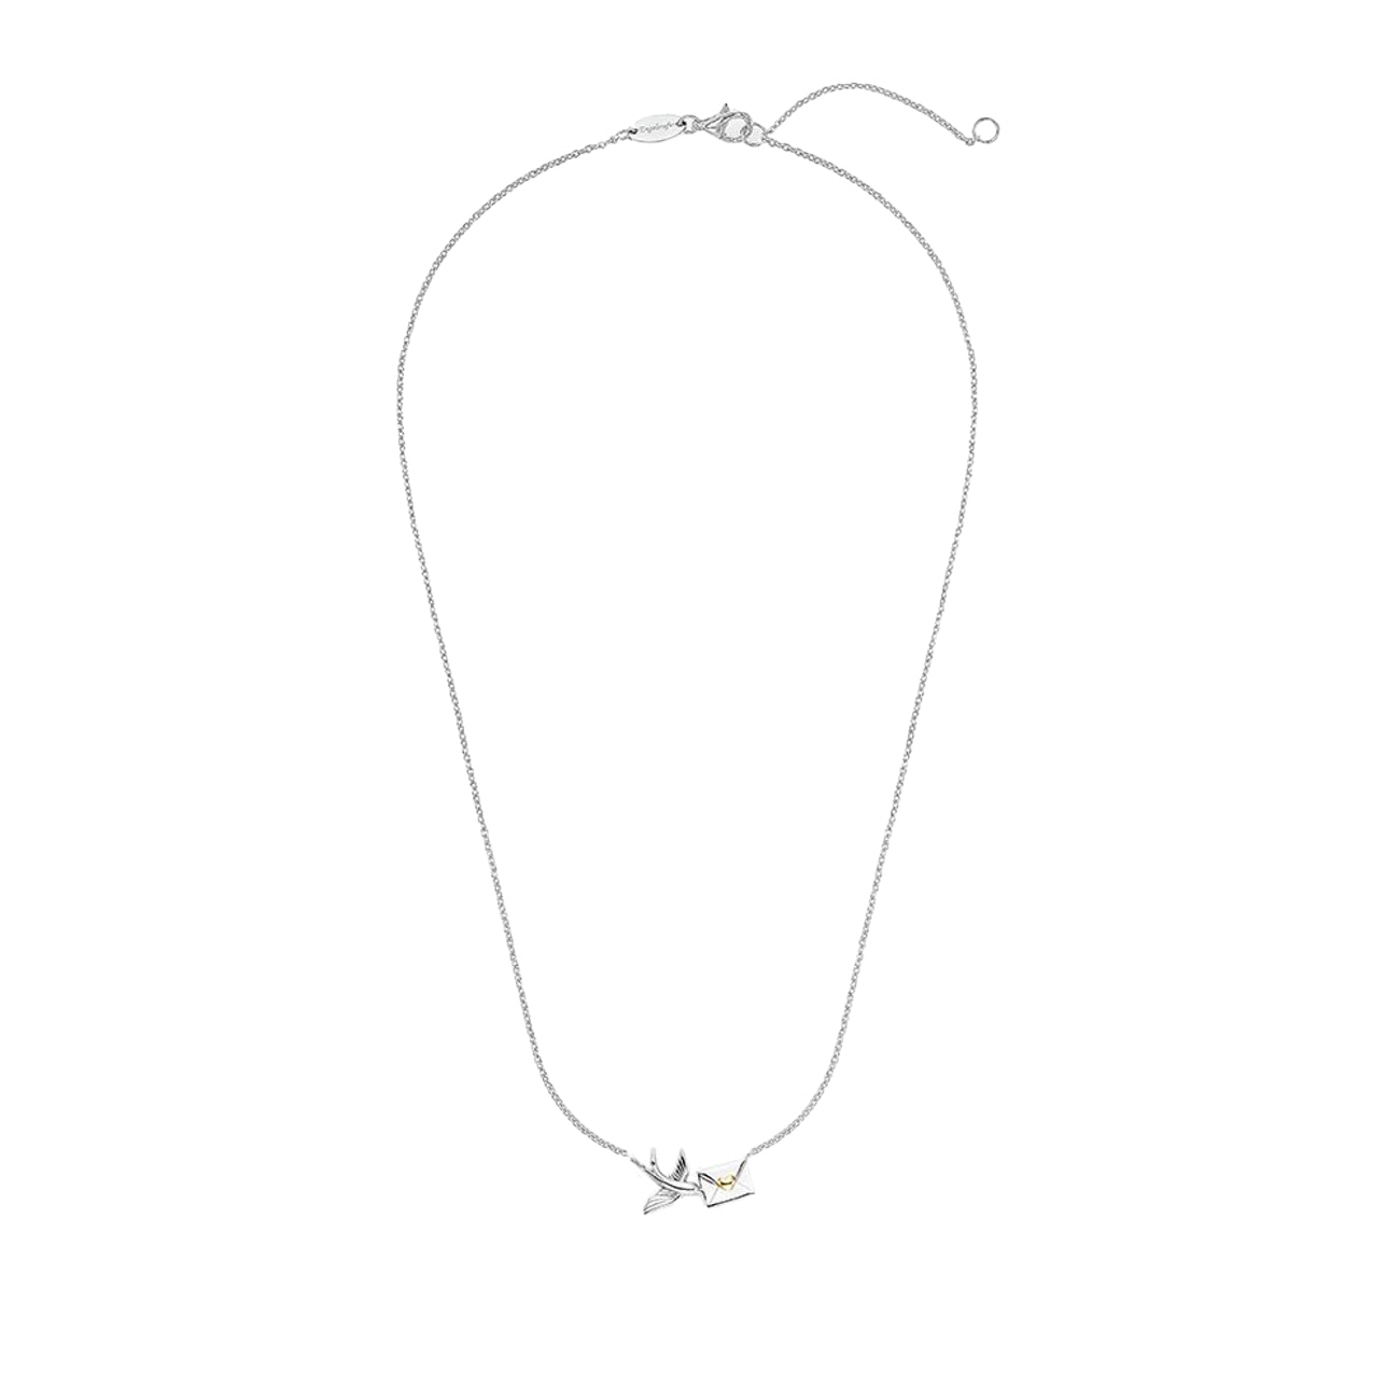 Engelsrufer Swallow Necklace in Sterling Silver 925